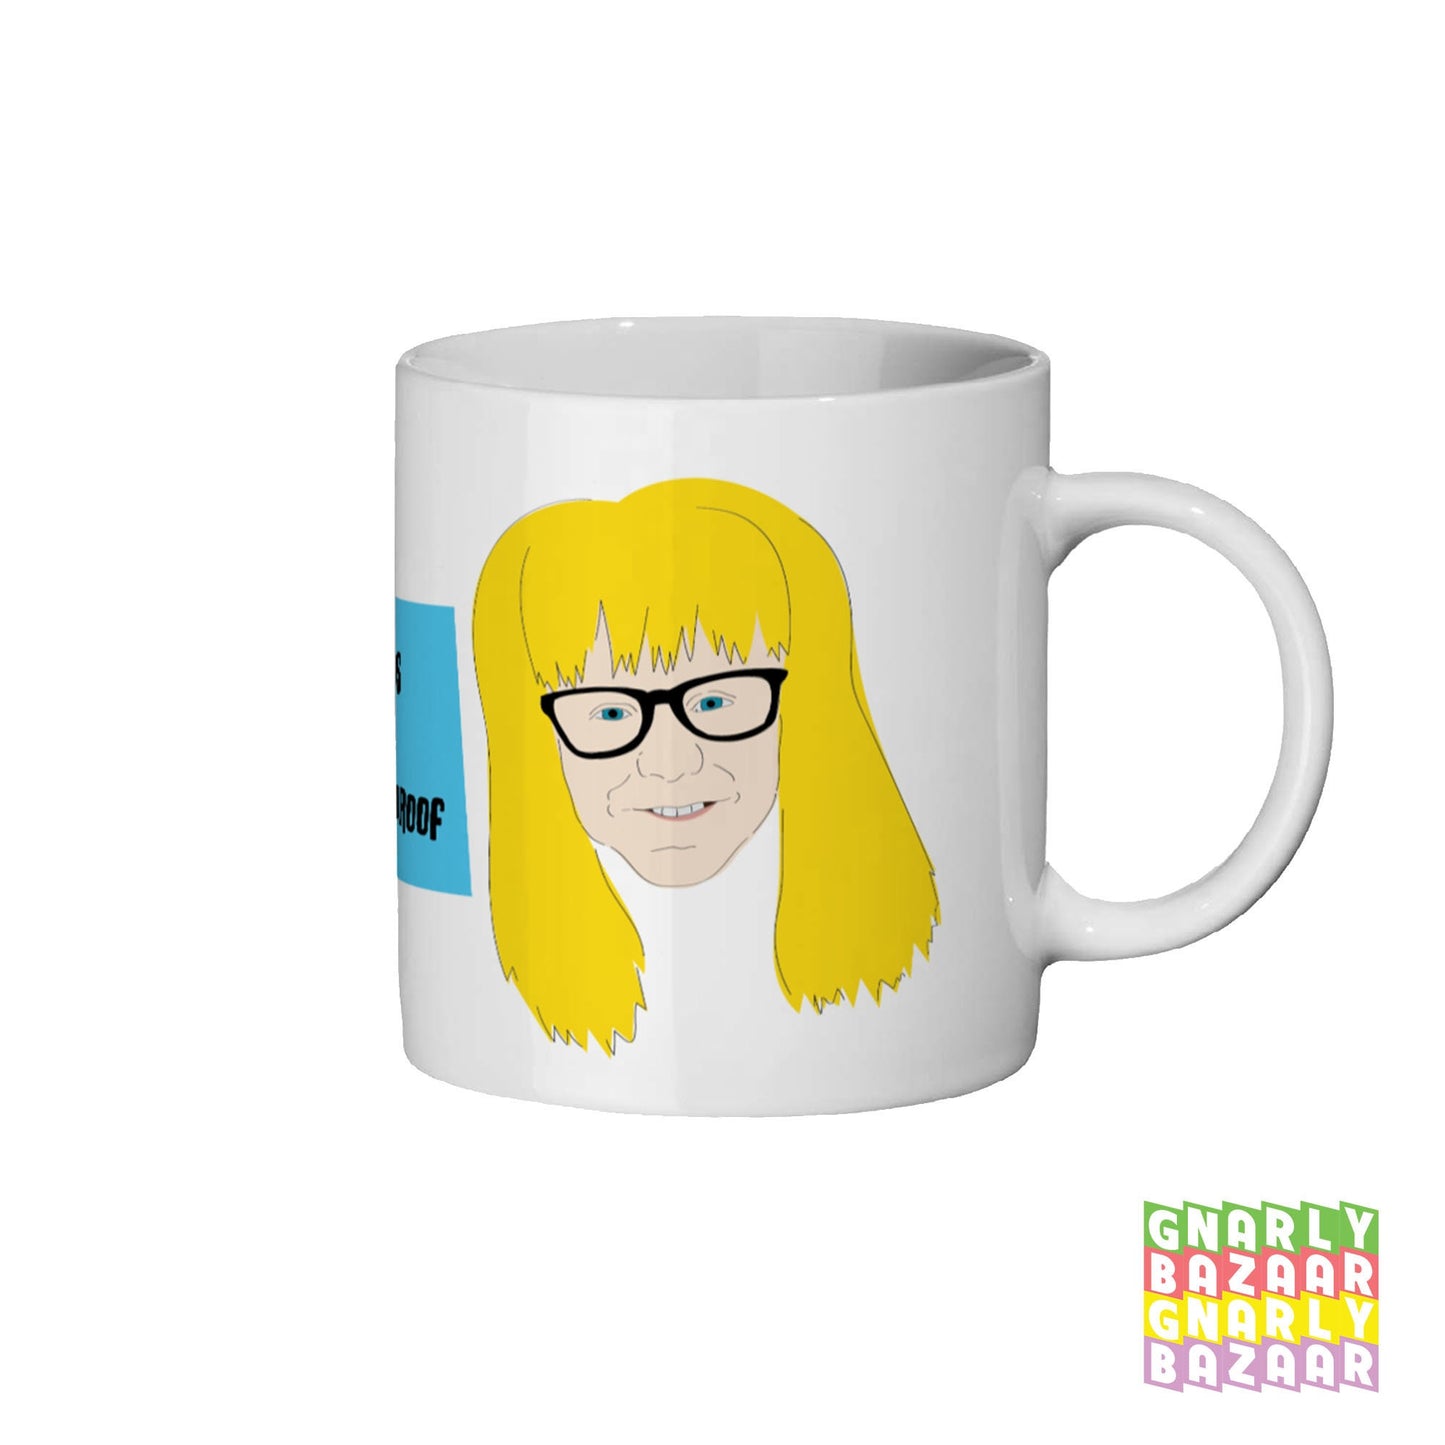 Waynes World He Blows Goats! 90s cult movie Quote Mug Funny Gift Coffee Novelty Present